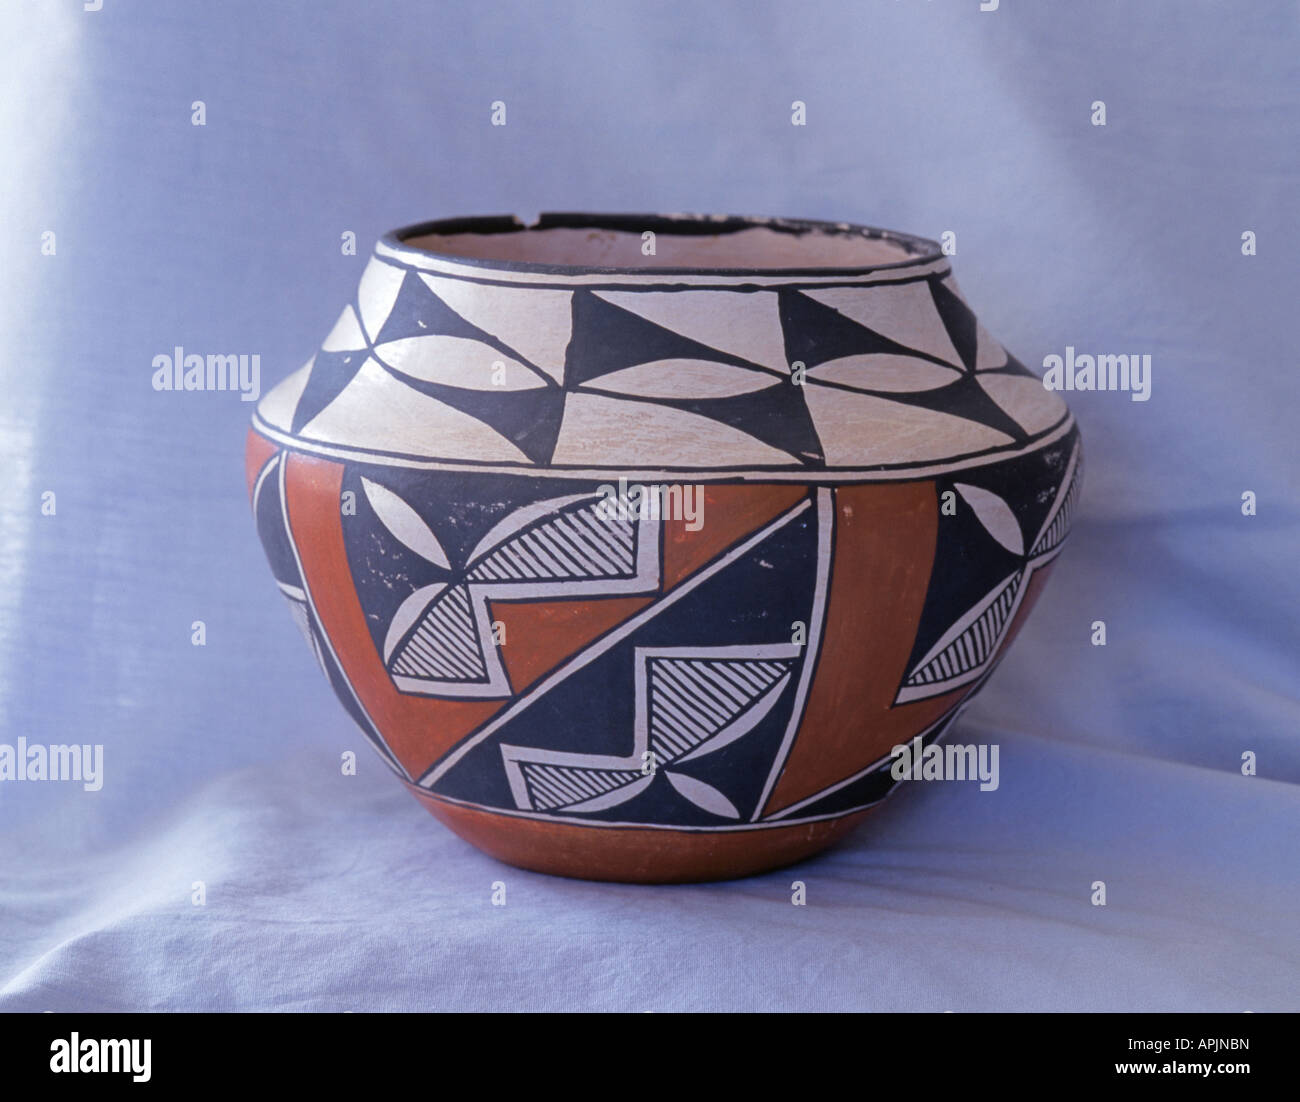 An antique Acoma Indian ceramic pot or bowl from the Acoma Indian Pueblo sky city in central New Mexico, made by Nellie Chino. Stock Photo